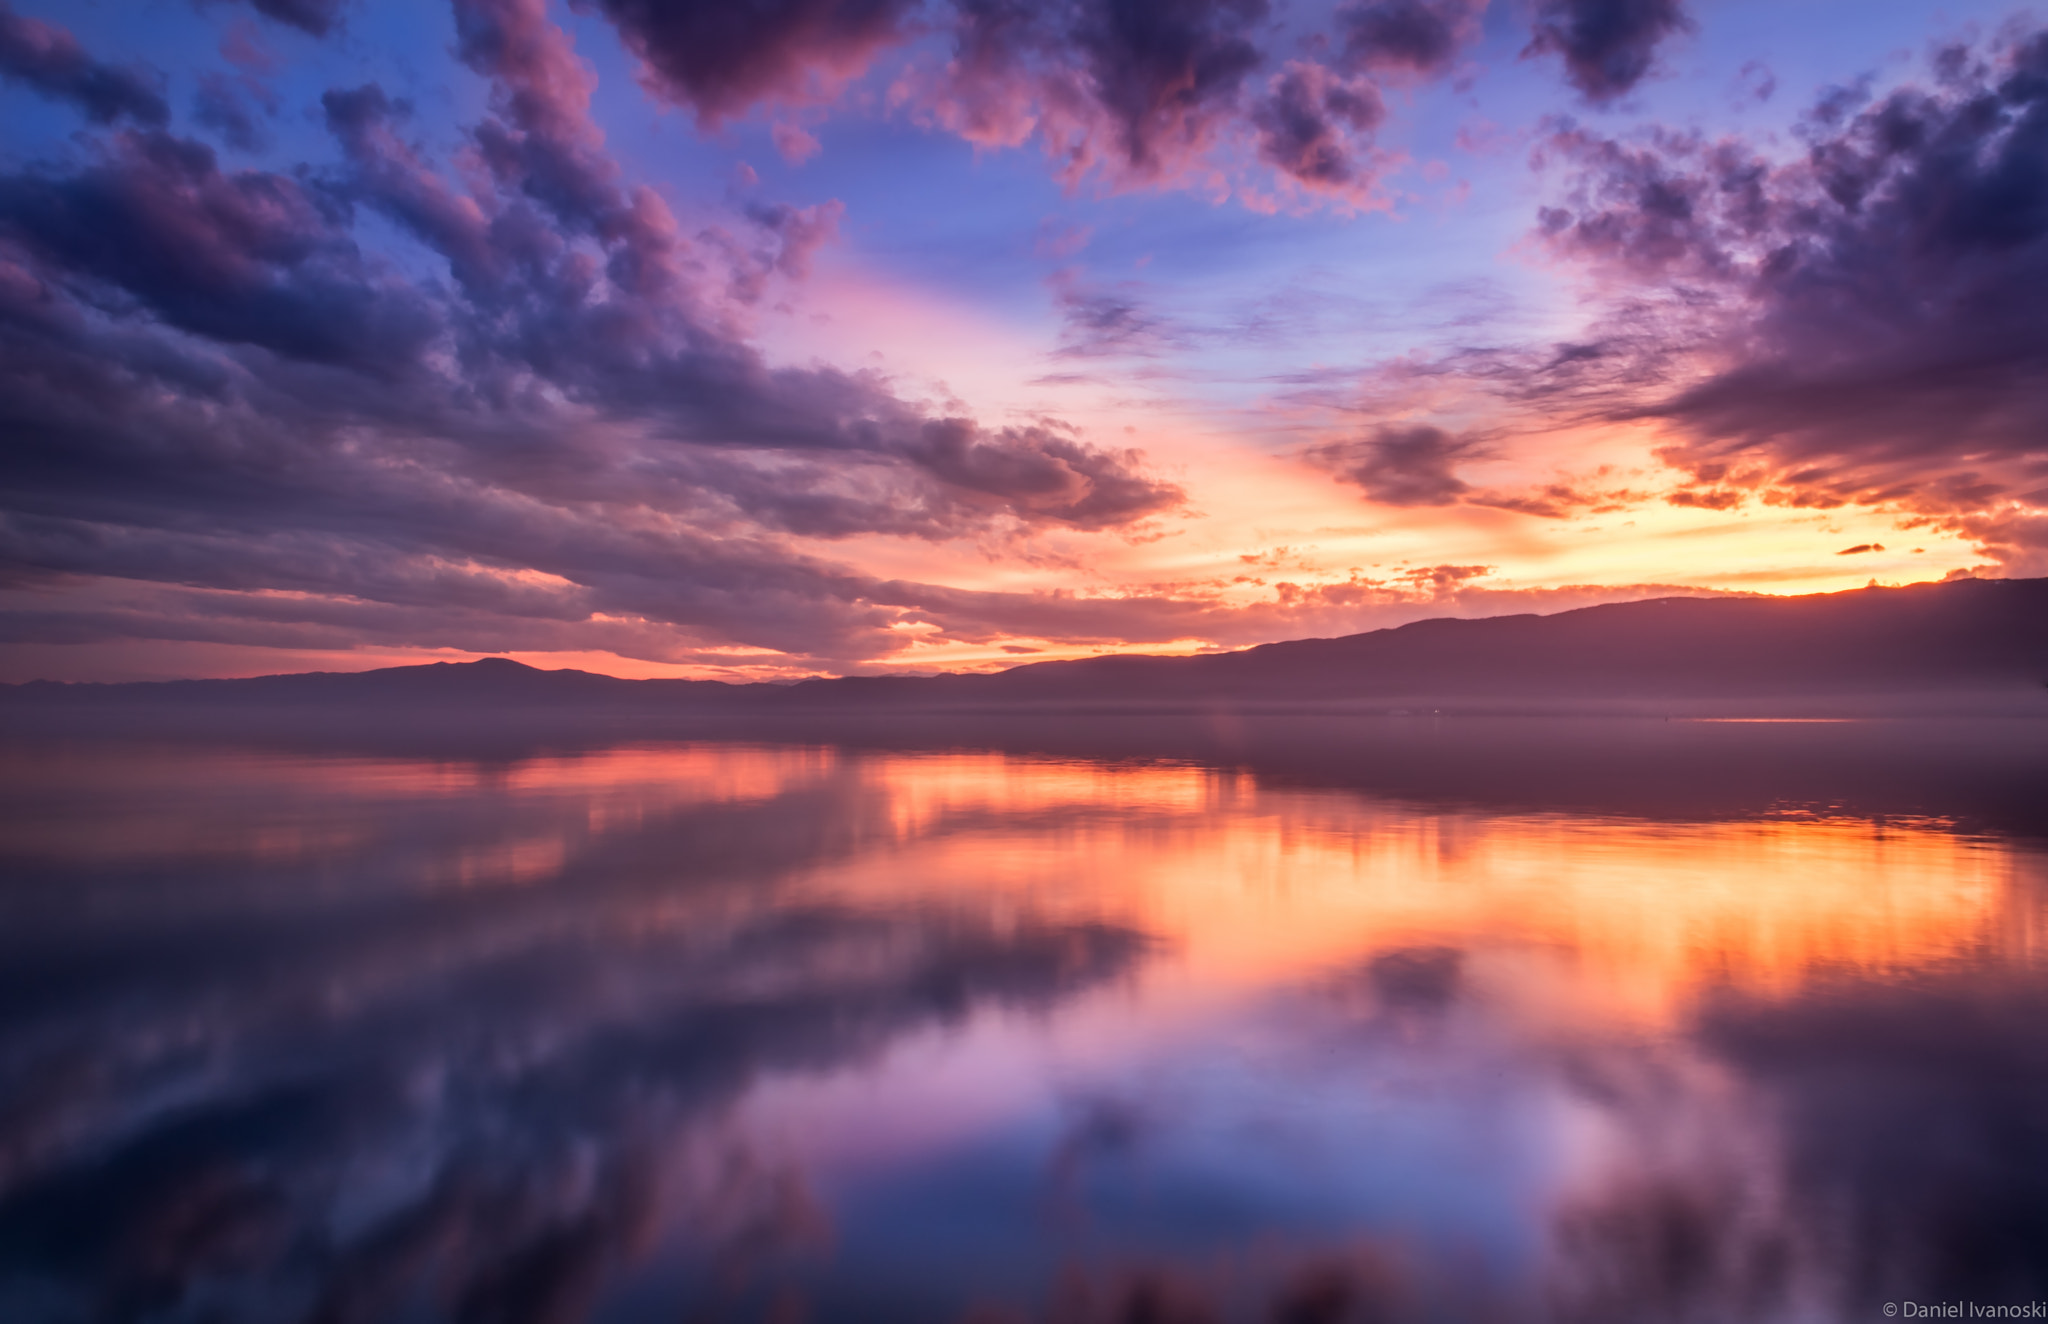 Nikon D5500 + Tamron SP AF 17-50mm F2.8 XR Di II VC LD Aspherical (IF) sample photo. Sunset over lake ohrid photography